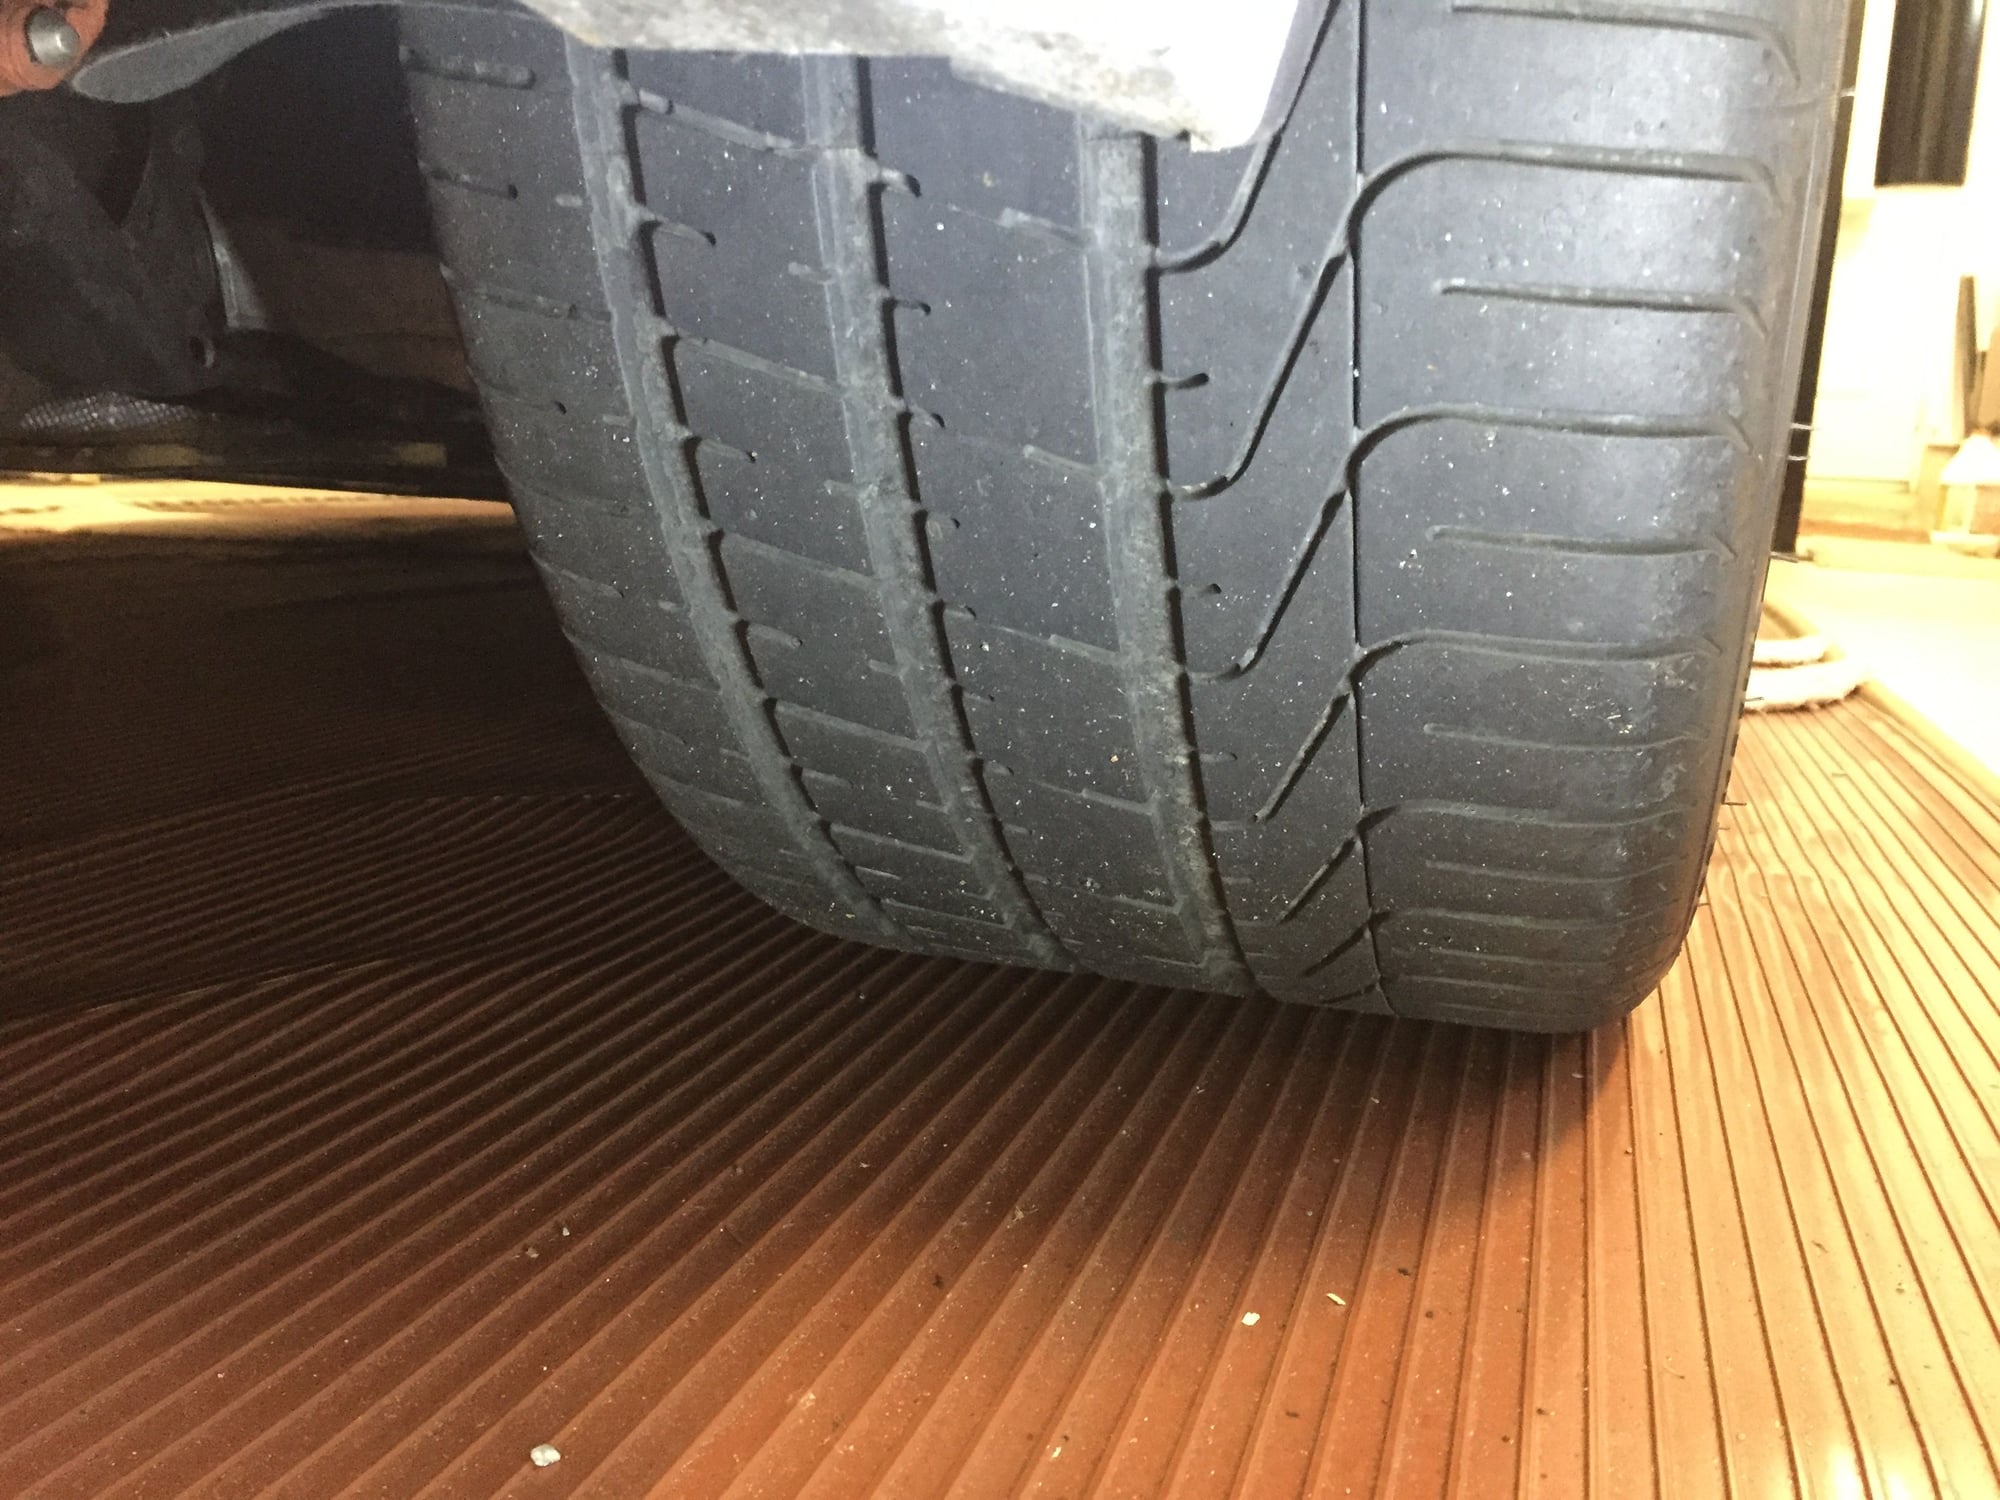 Wheels and Tires/Axles - Rear 20" tires (Tyres) for sale - Used - All Years Jaguar F-Type - Roxbury, NJ 07876, United States